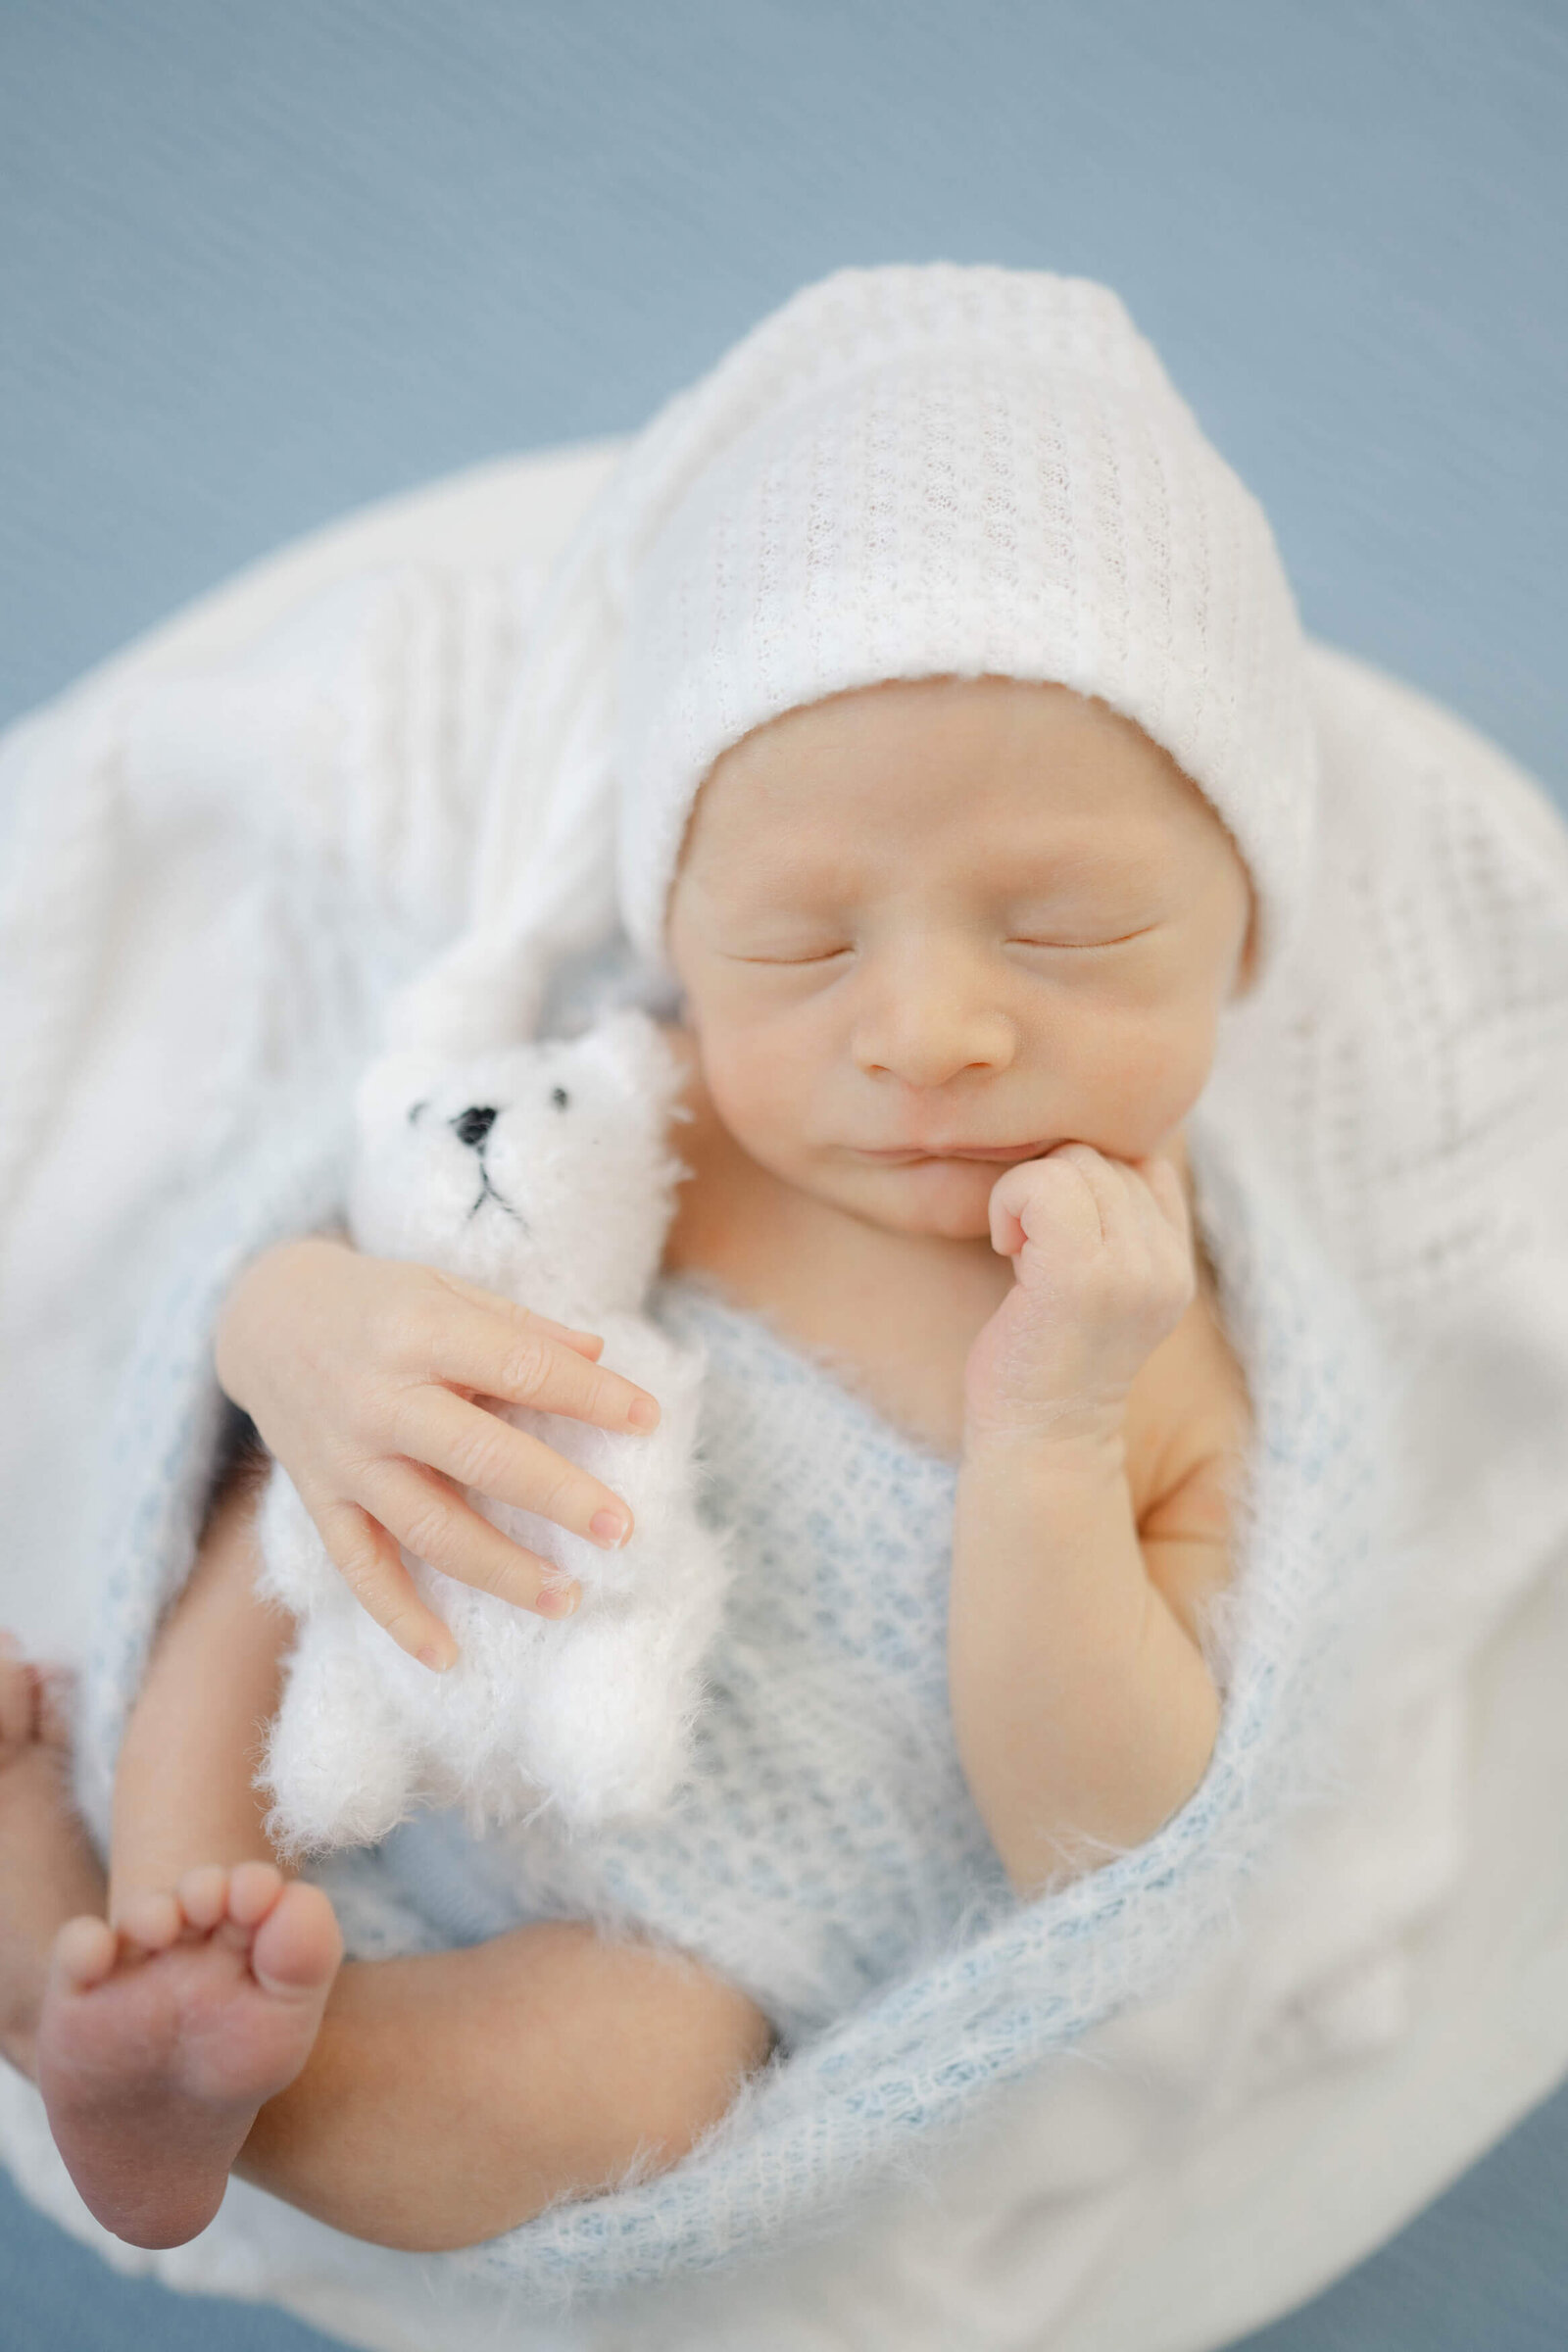 adorable baby swaddled in blue and wearing a sleepy hat cuddling a fuzzy mini teddy bear